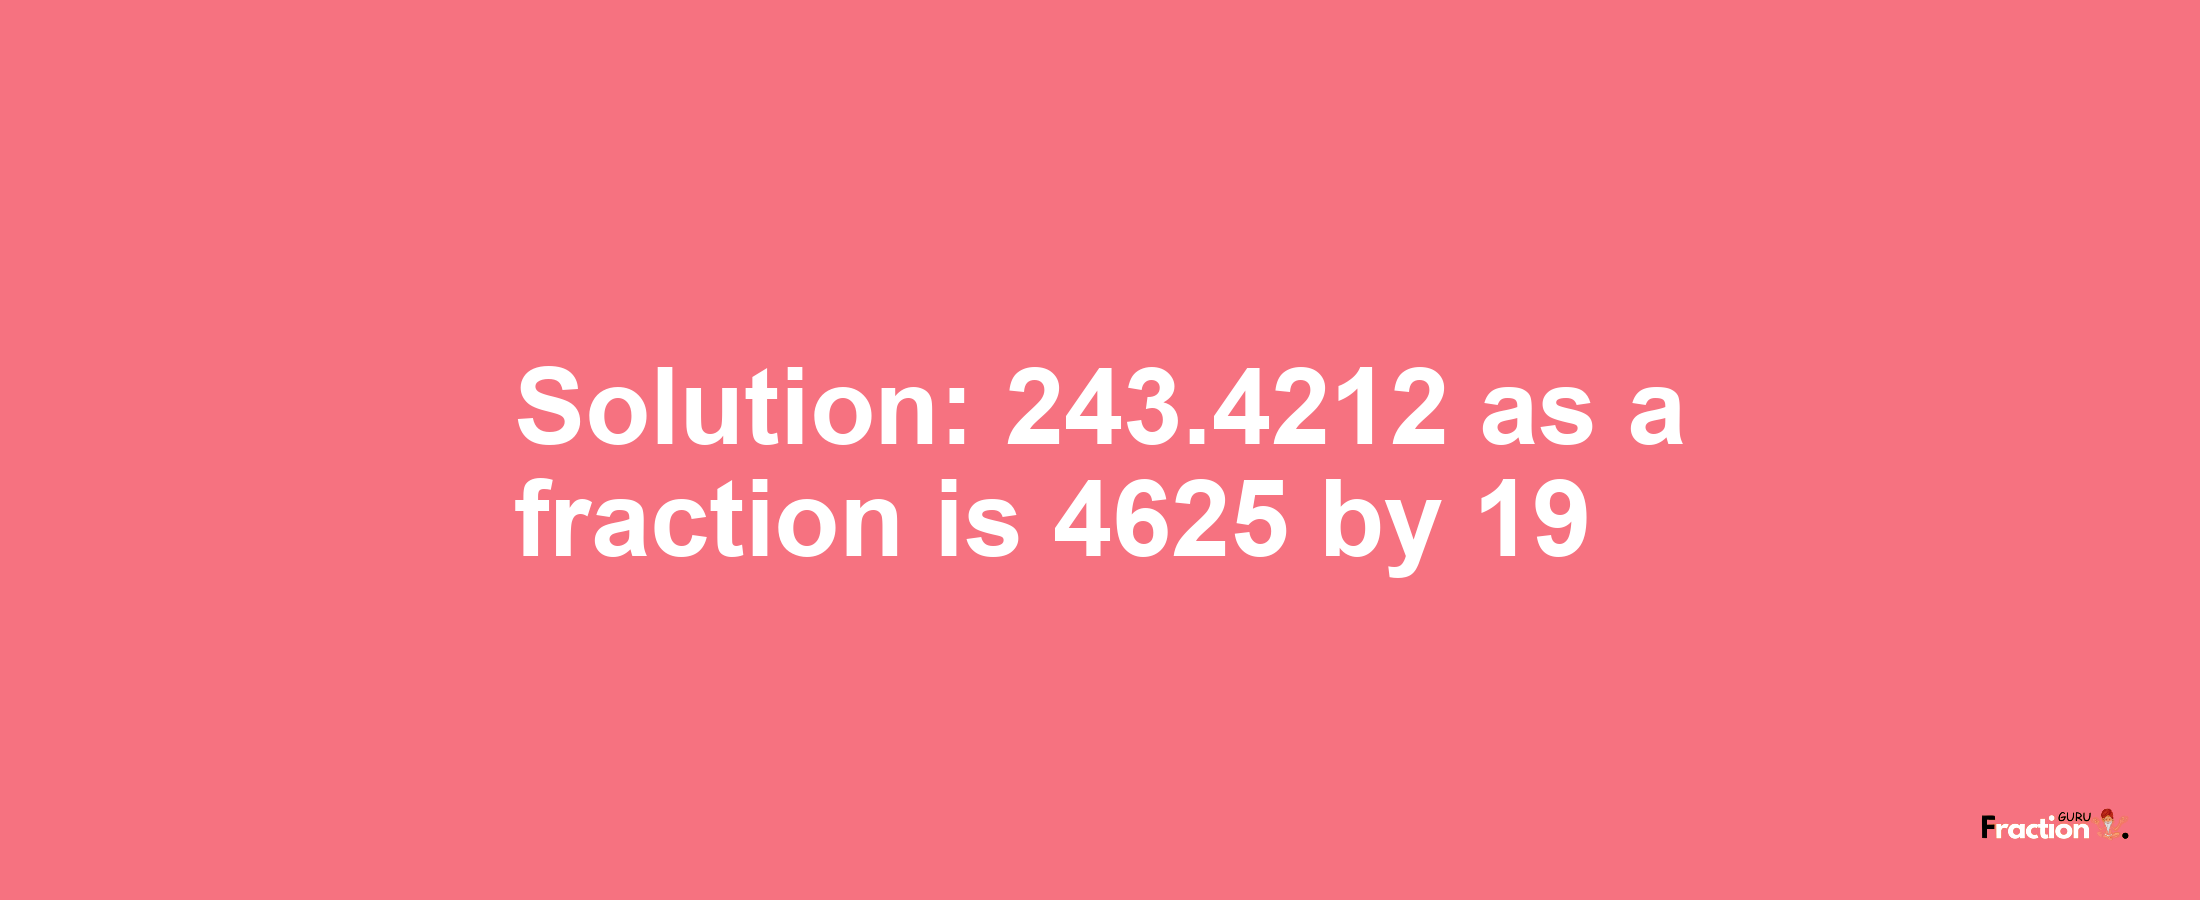 Solution:243.4212 as a fraction is 4625/19